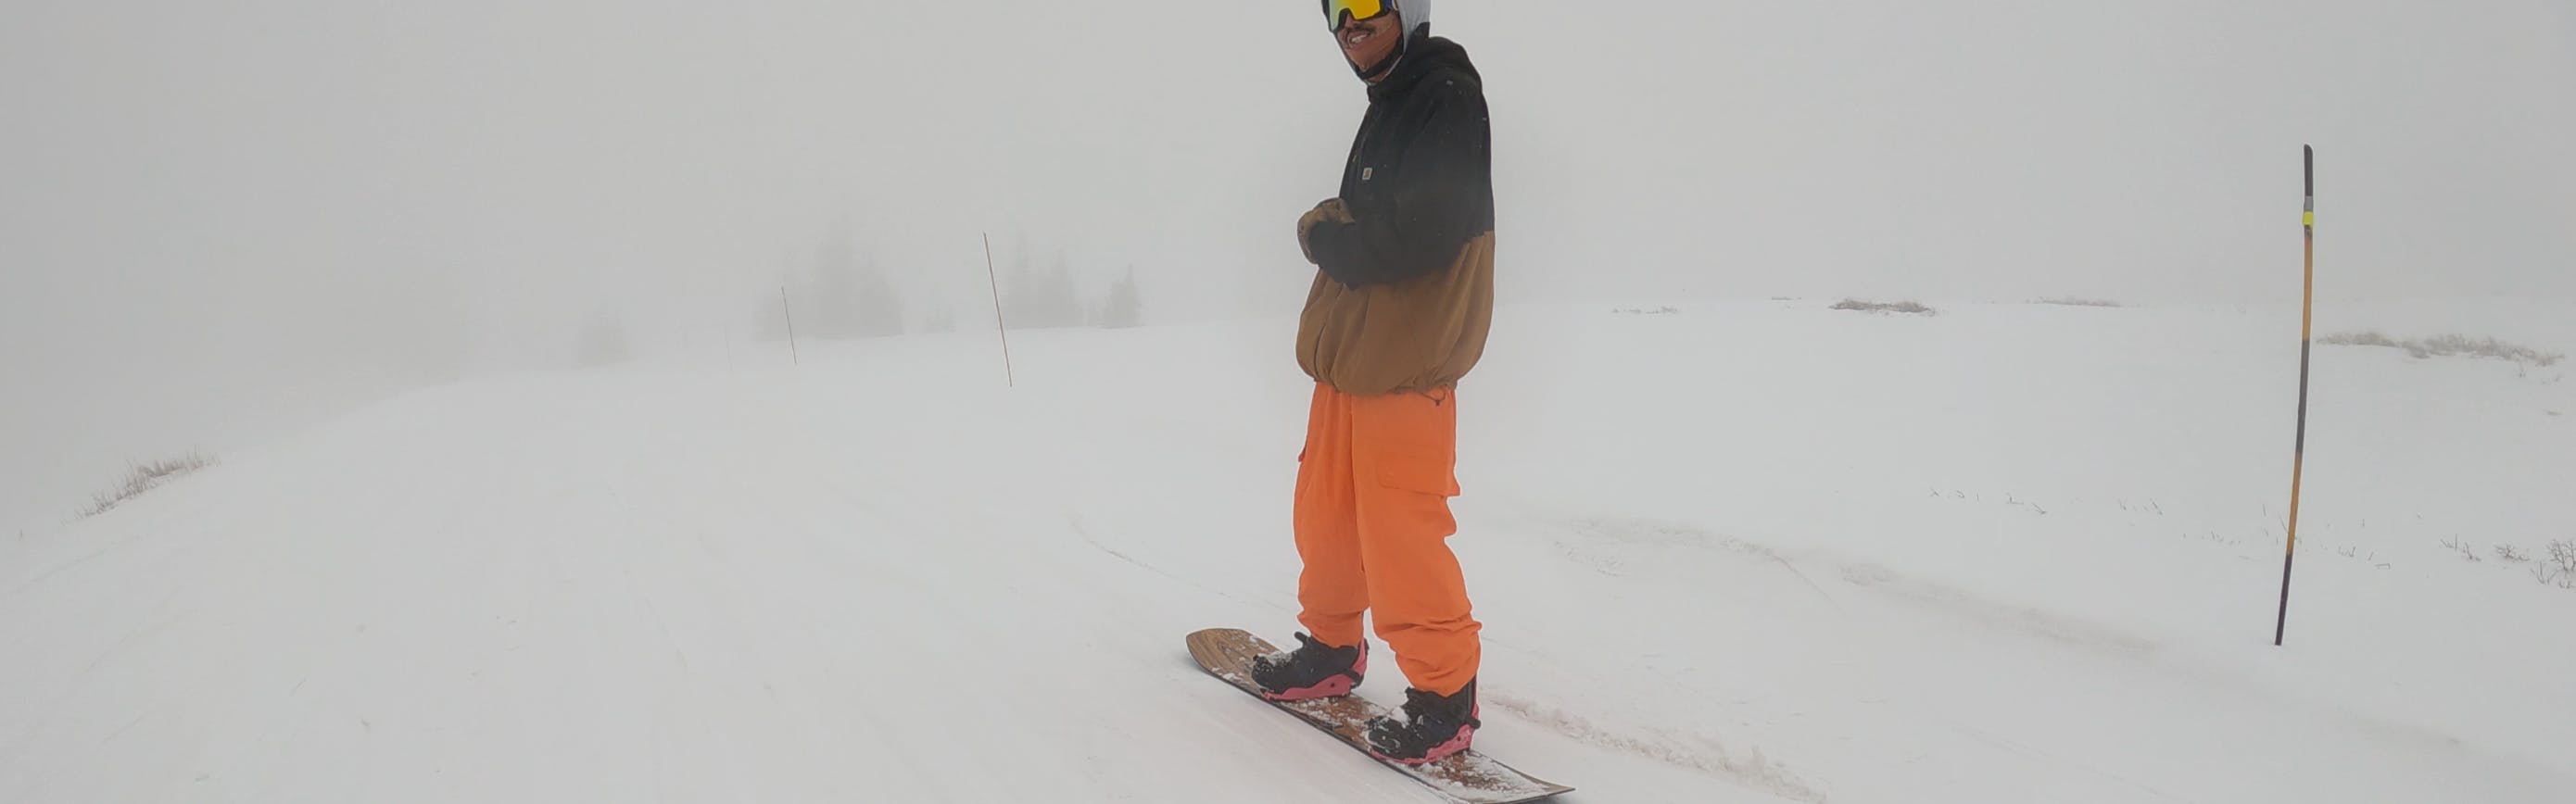 A snowboarder riding the 2023 Jones Flagship Snowboard.